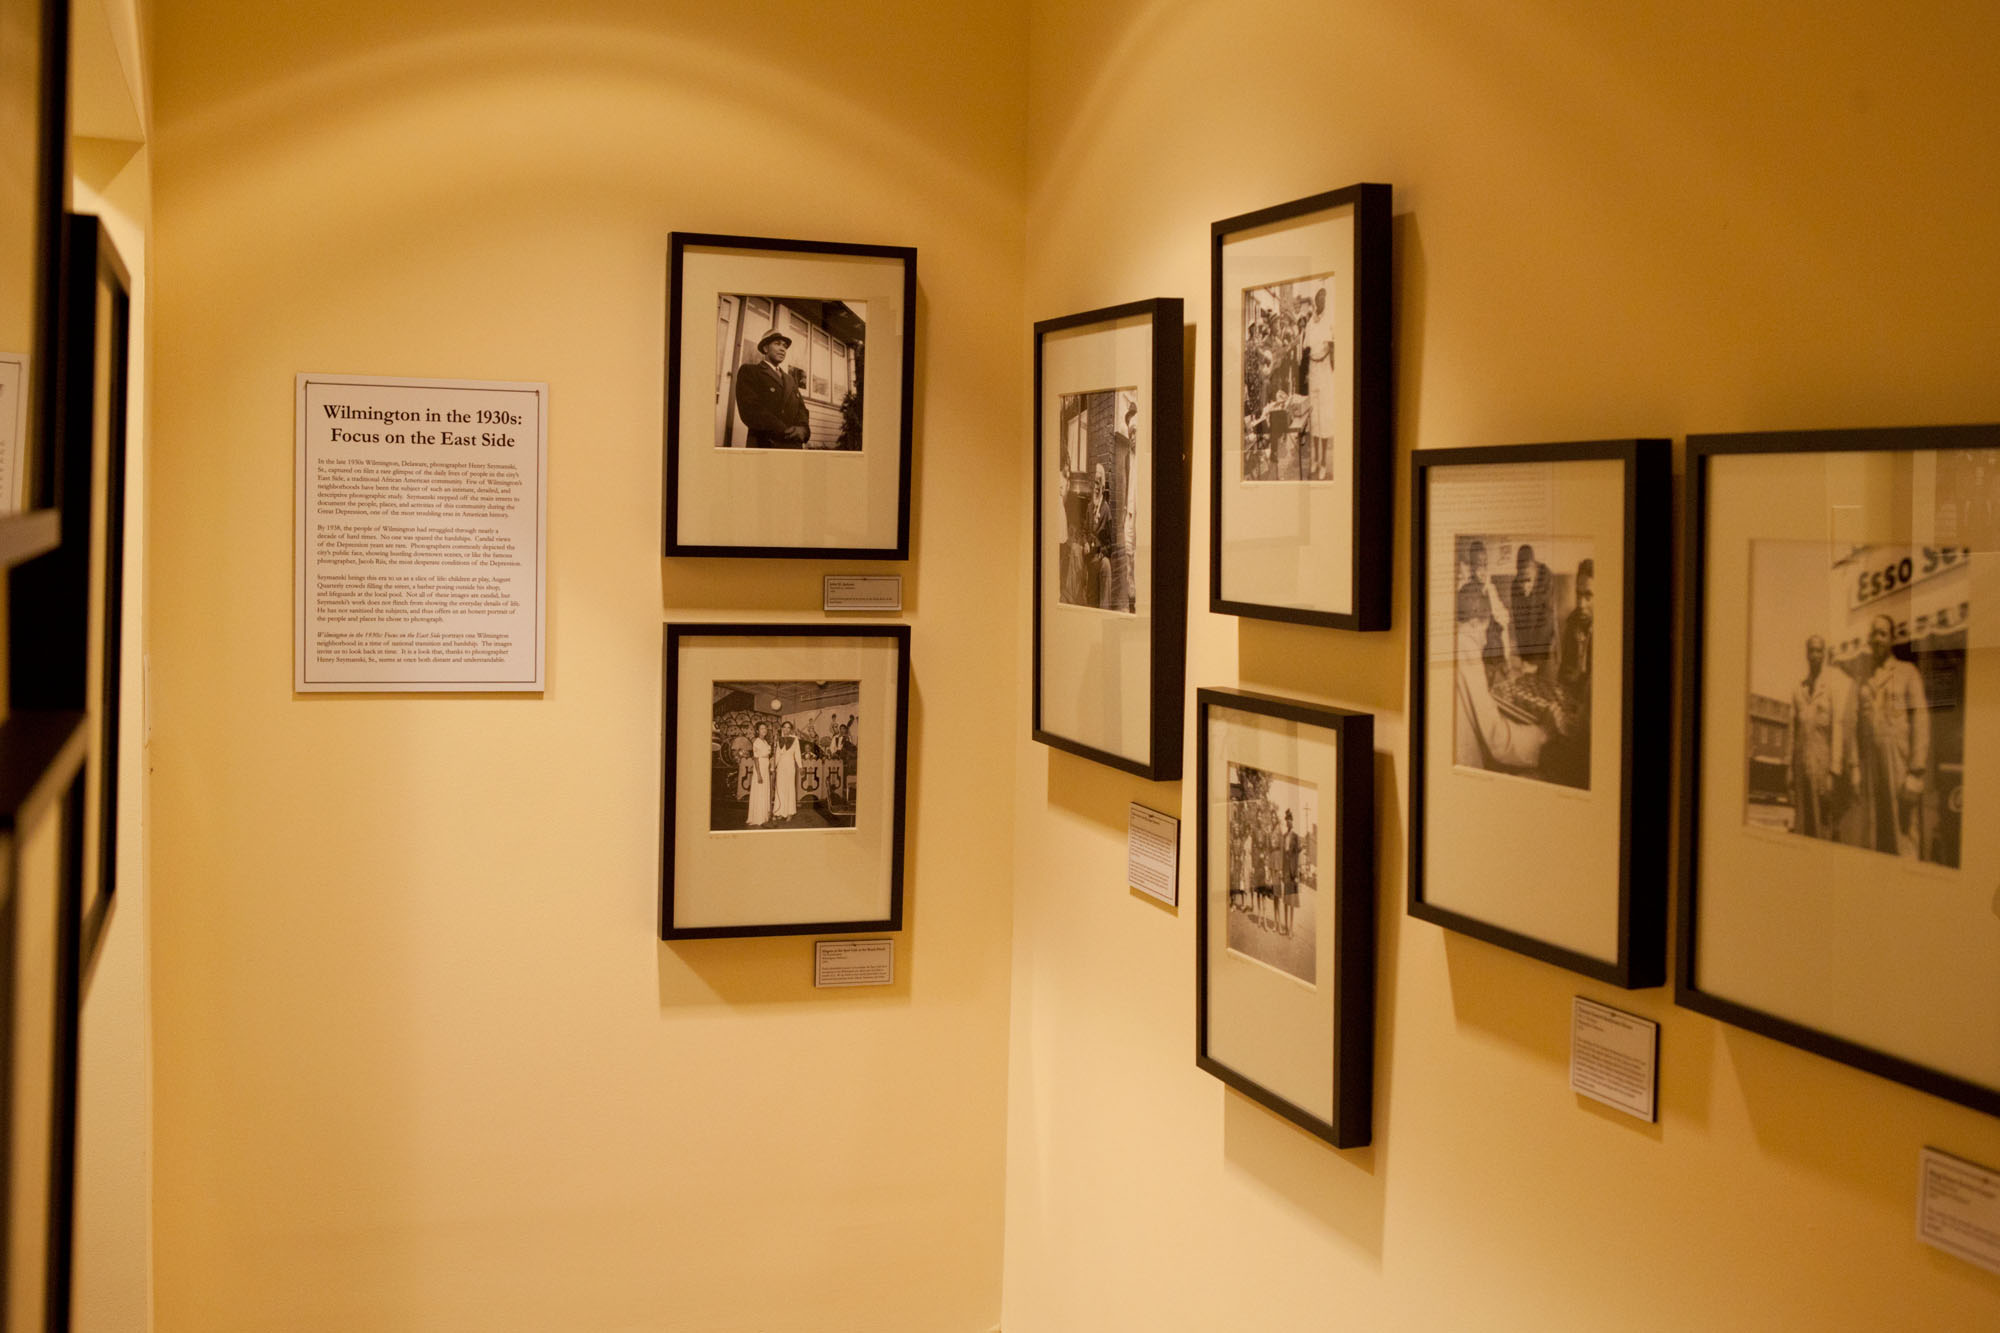 On Display: Photos from the Delaware Historical Society showcased during the 3rd Annual Black History Month Reception